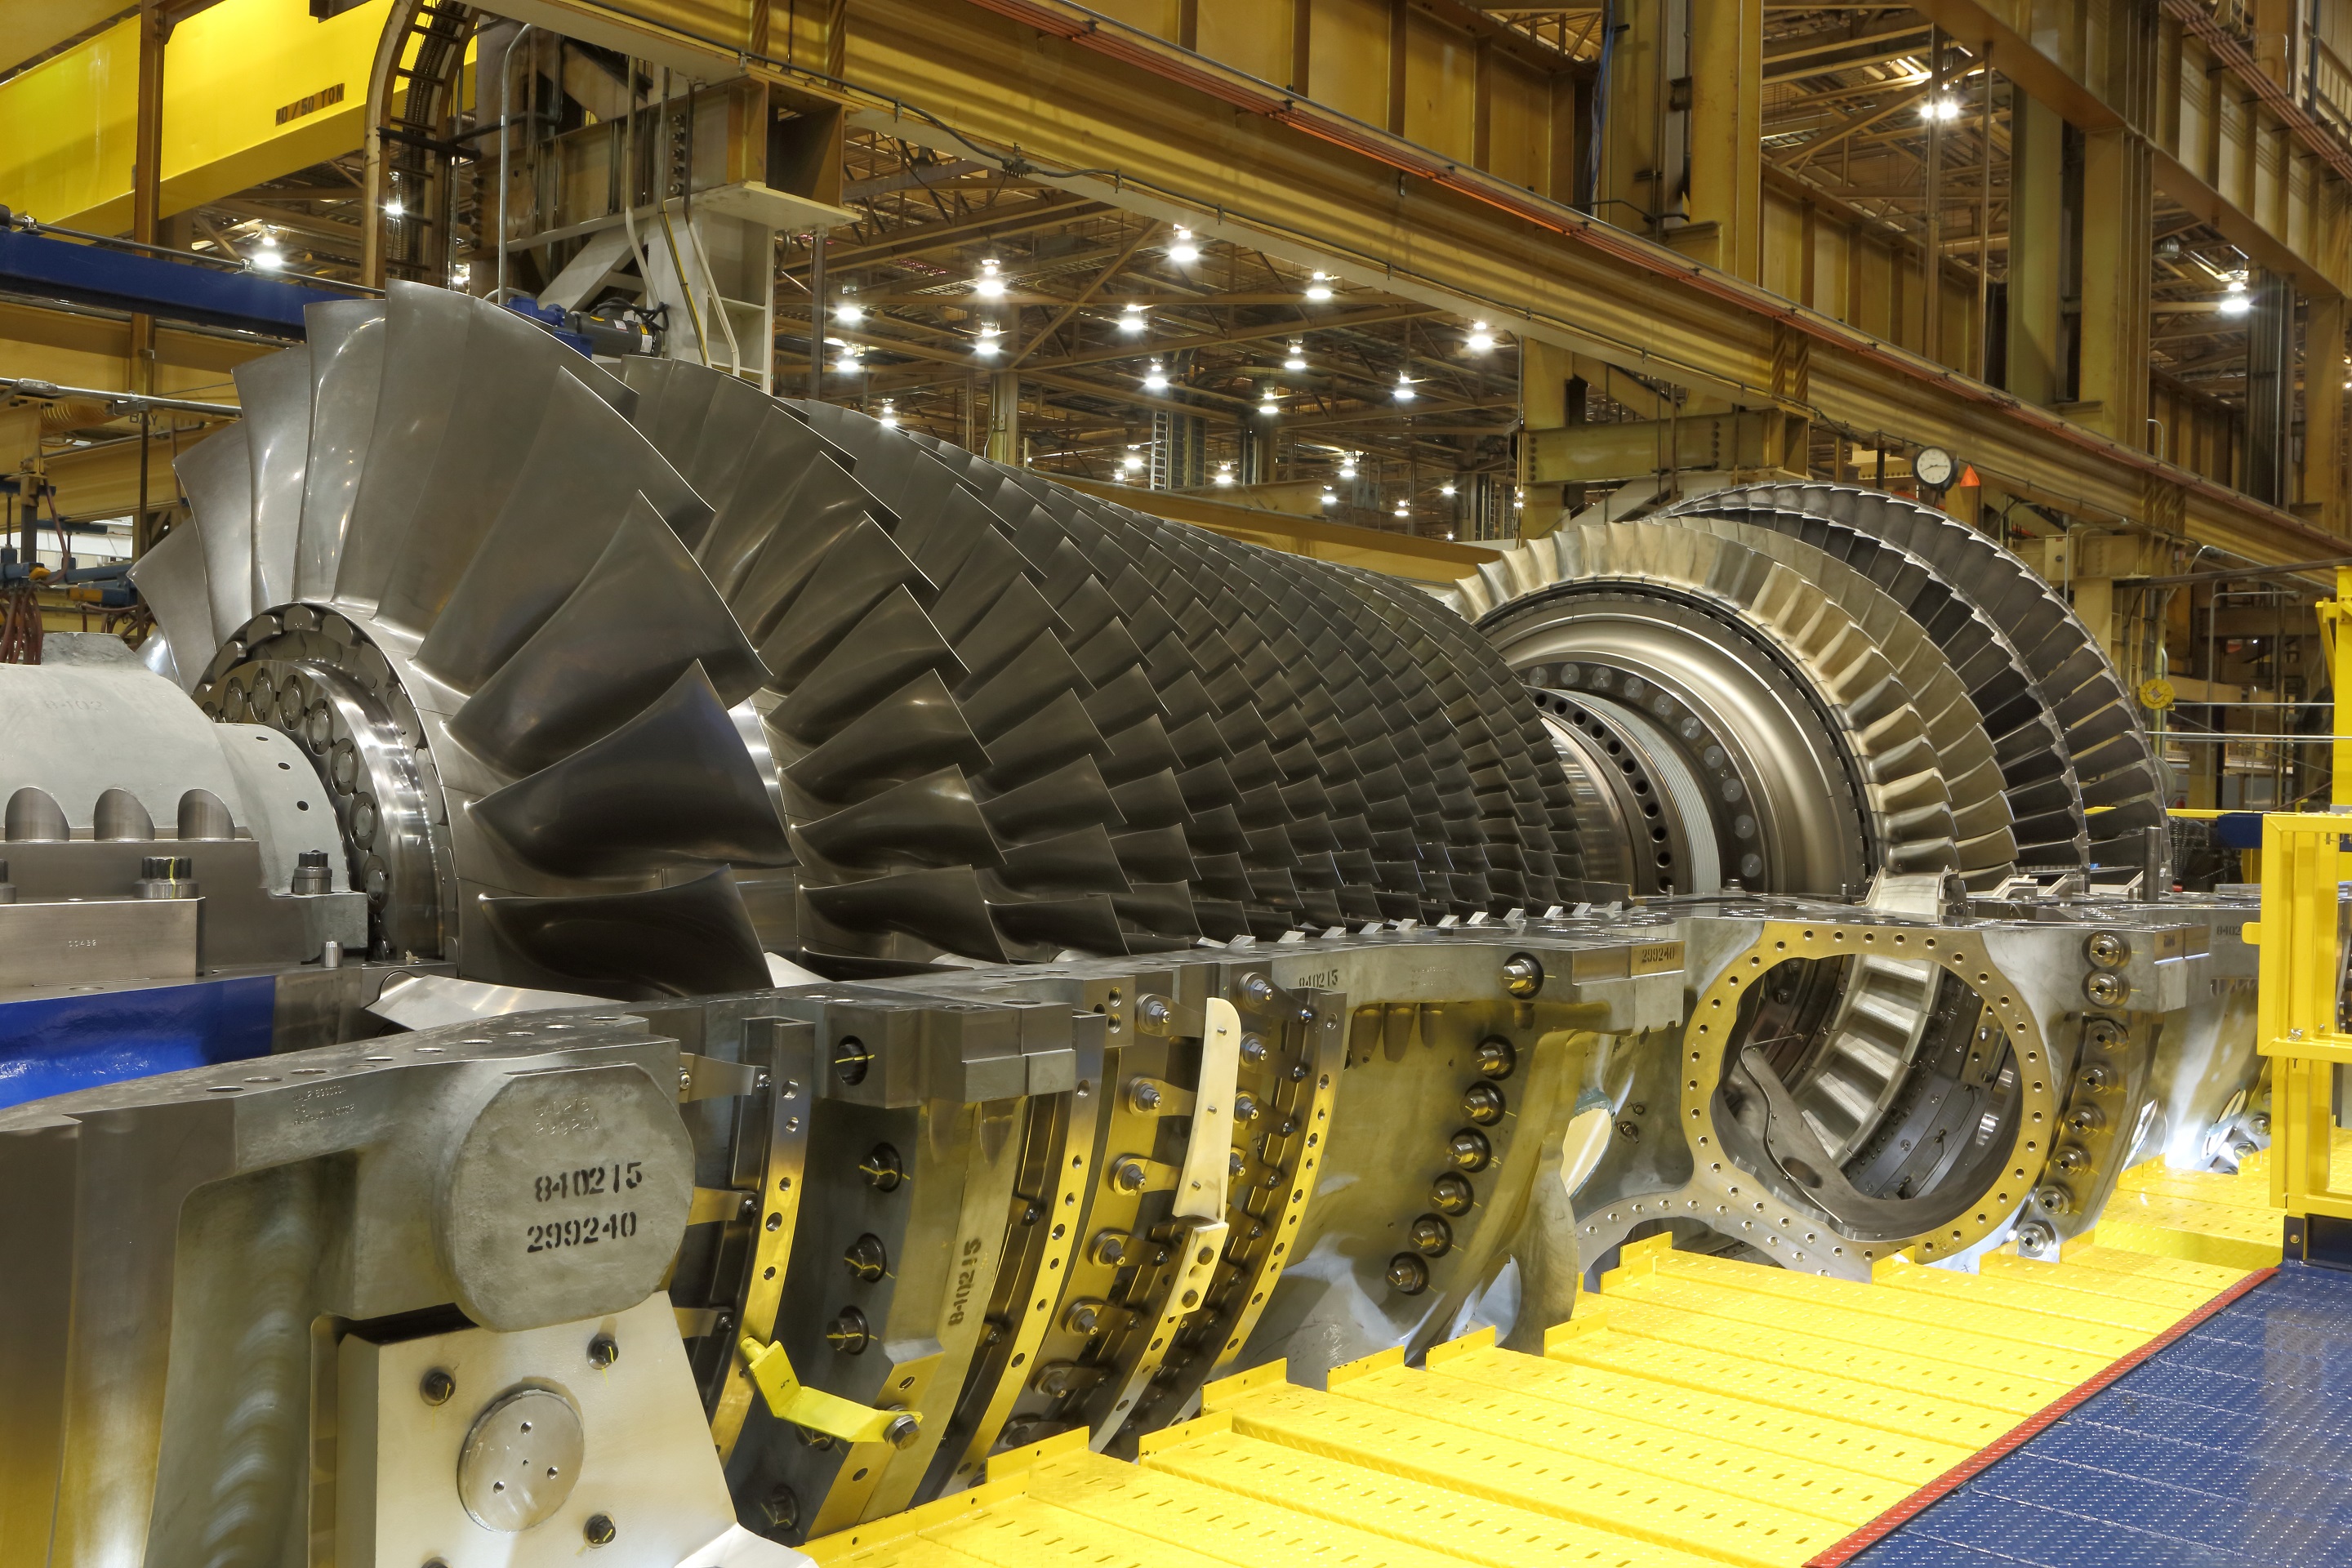 Gas turbine engines typically have Waspaloy components. Photo via GE.